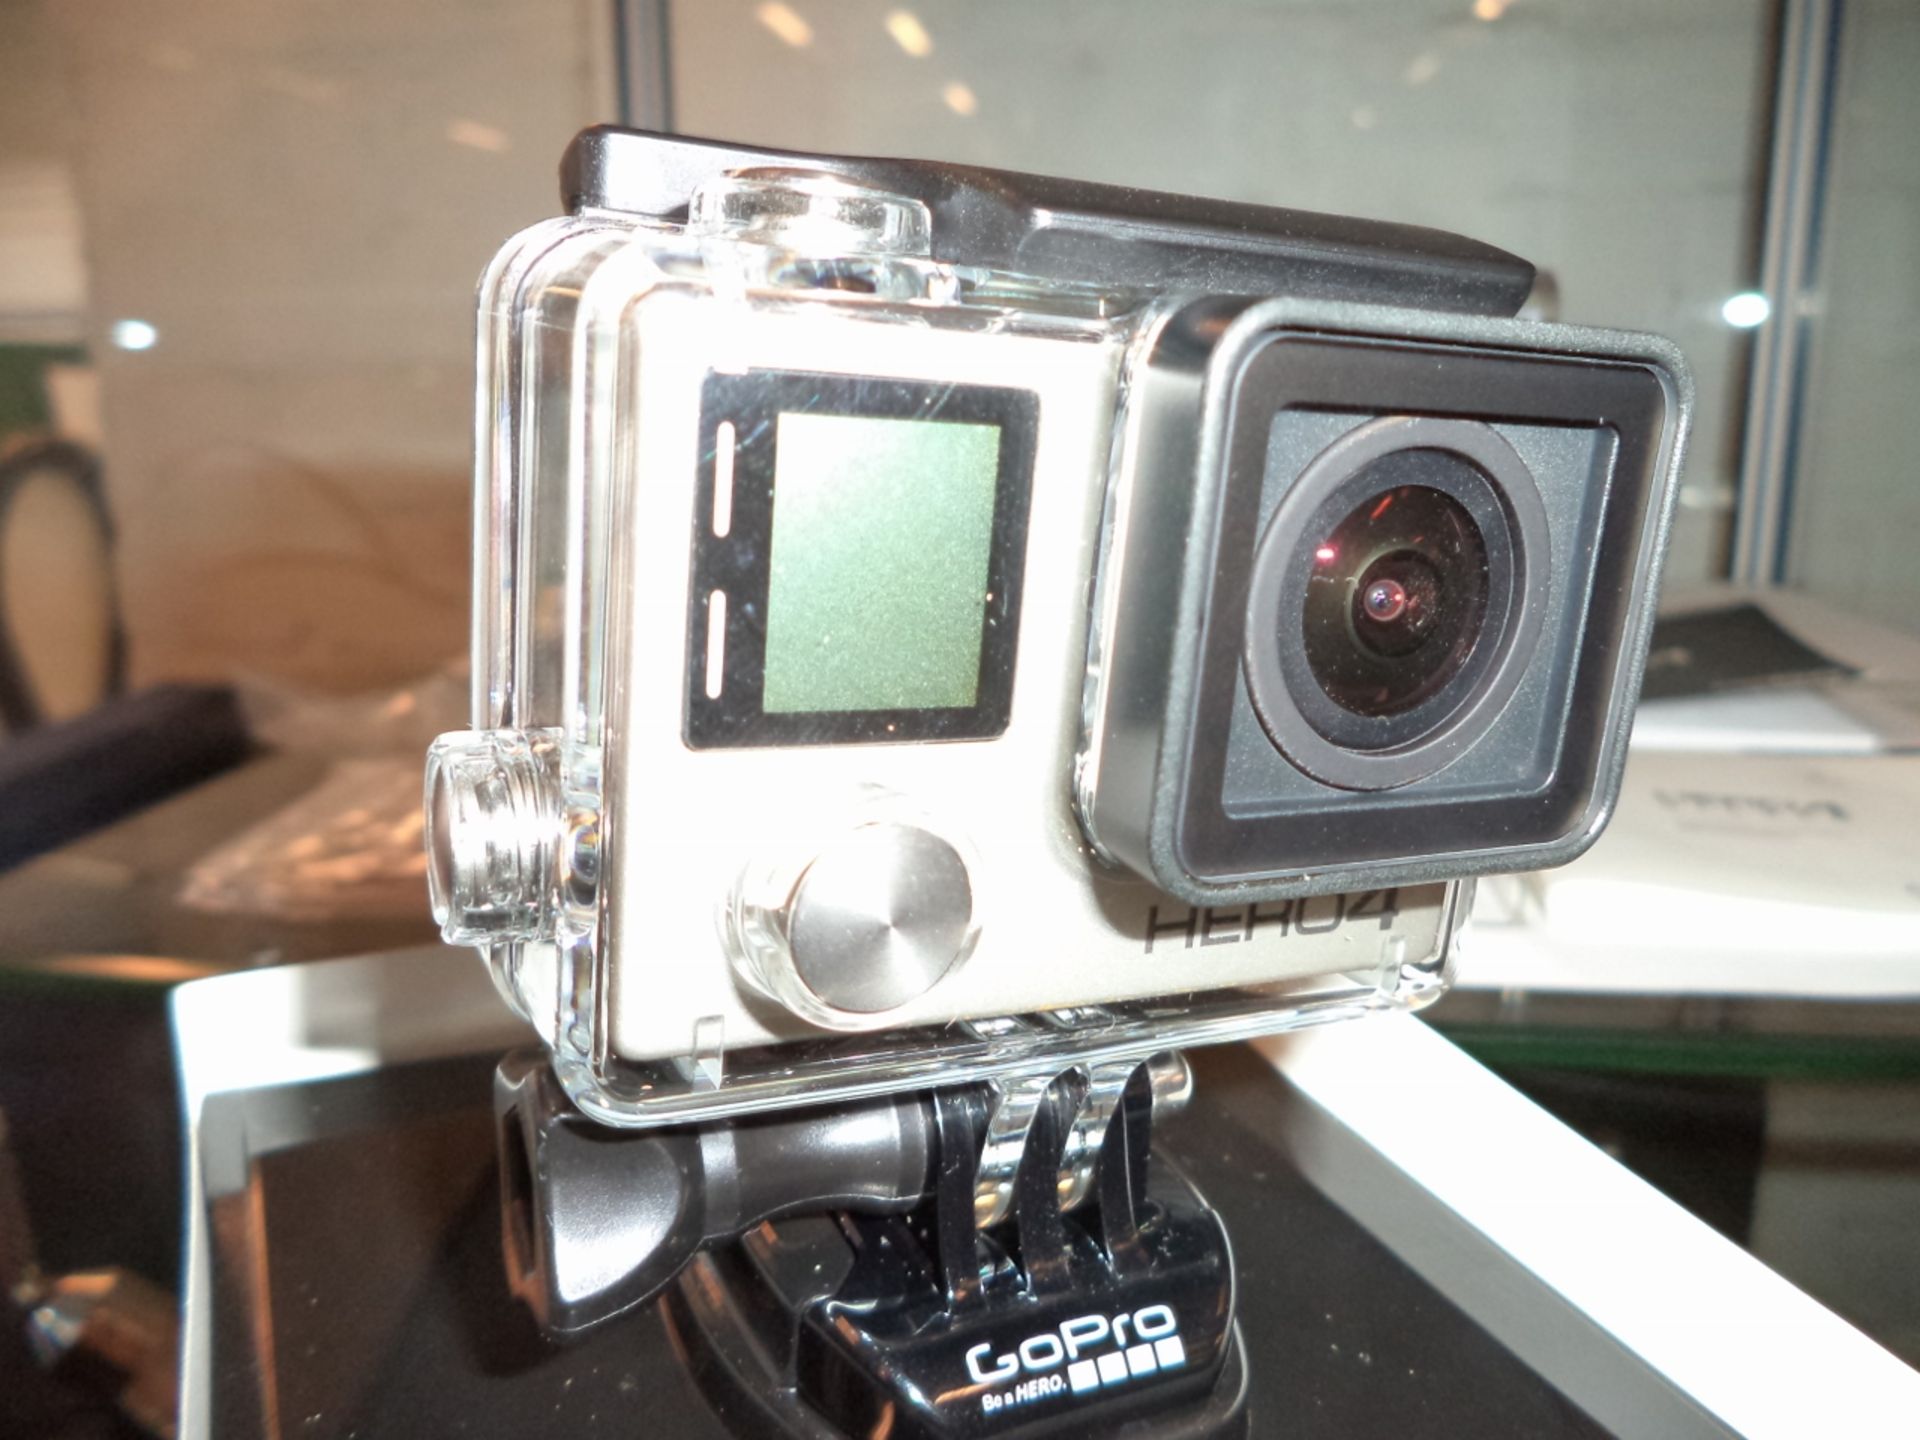 GoPro HERO4 Silver edition action video camera with built-in touchscreen display, box, manuals and - Image 4 of 11